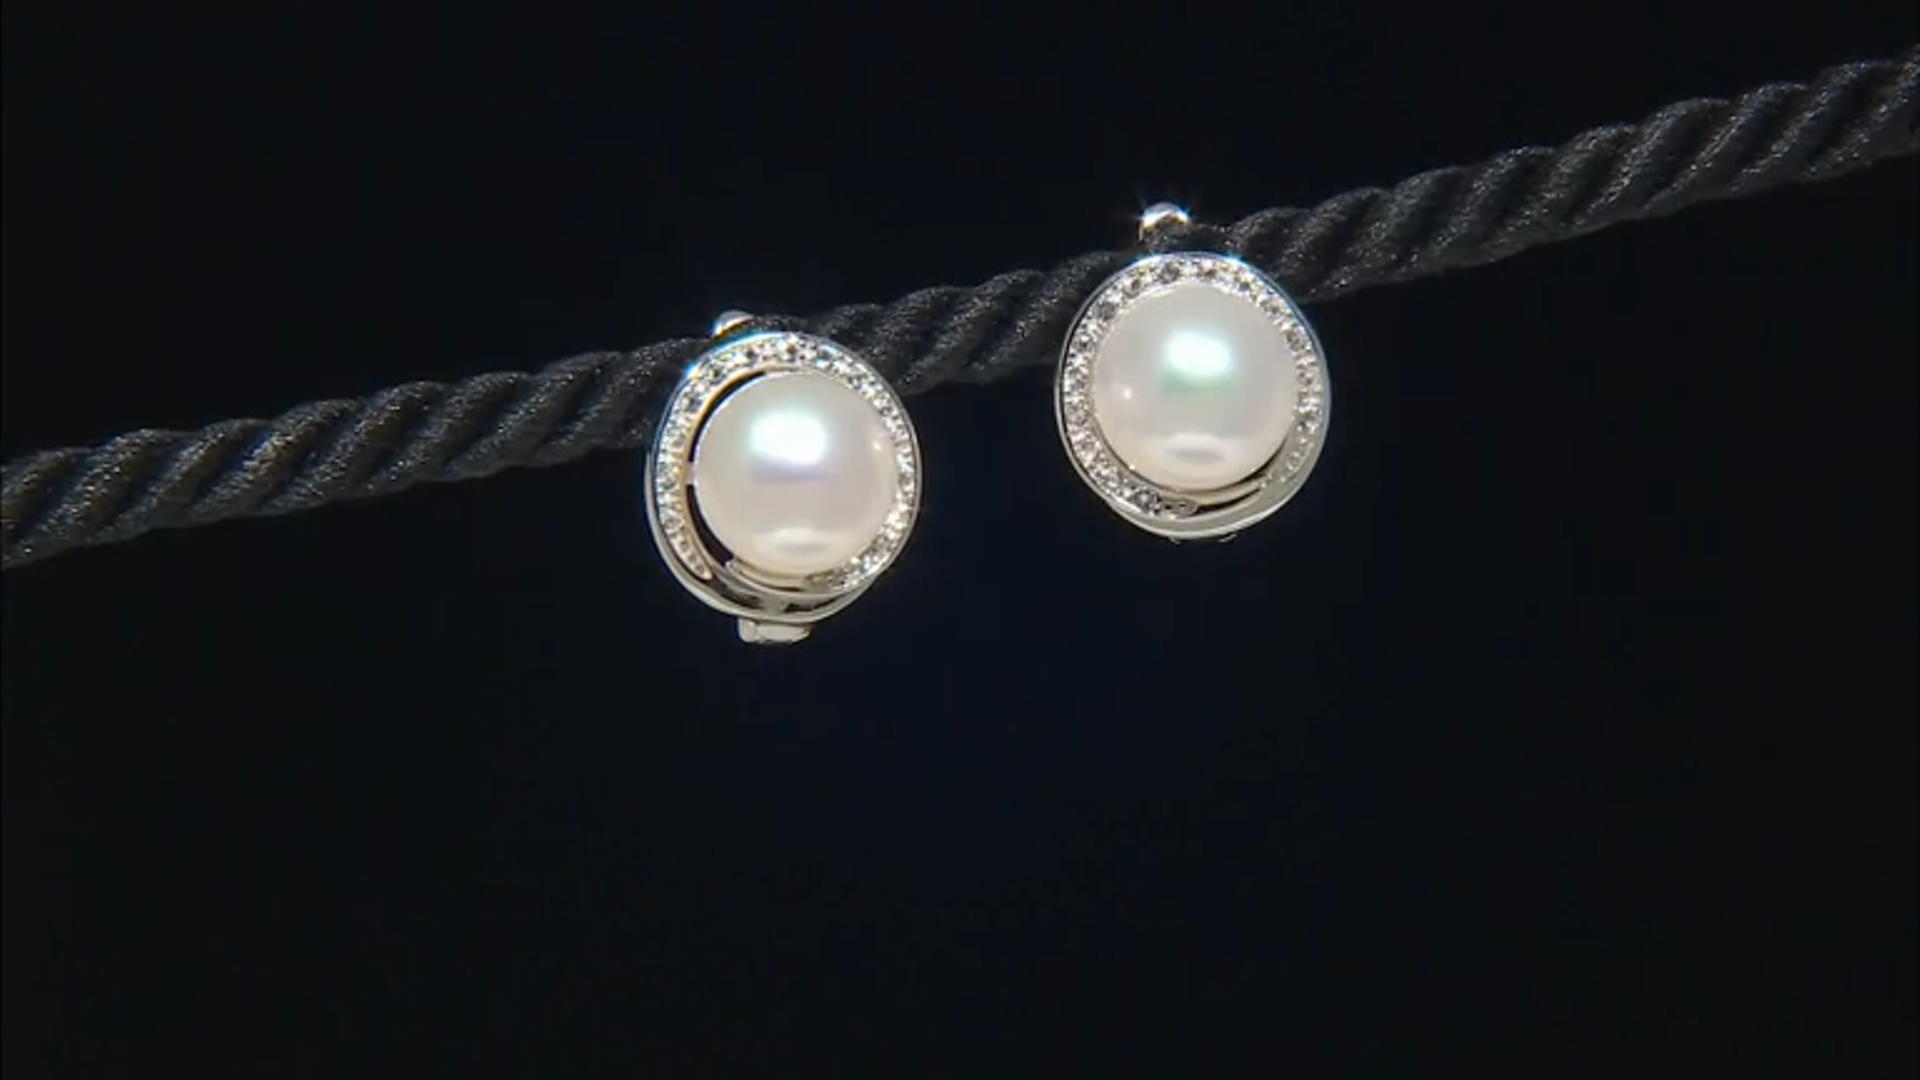 White Cultured Freshwater Pearl and White Topaz Accents Rhodium Over Sterling Silver Earrings Video Thumbnail